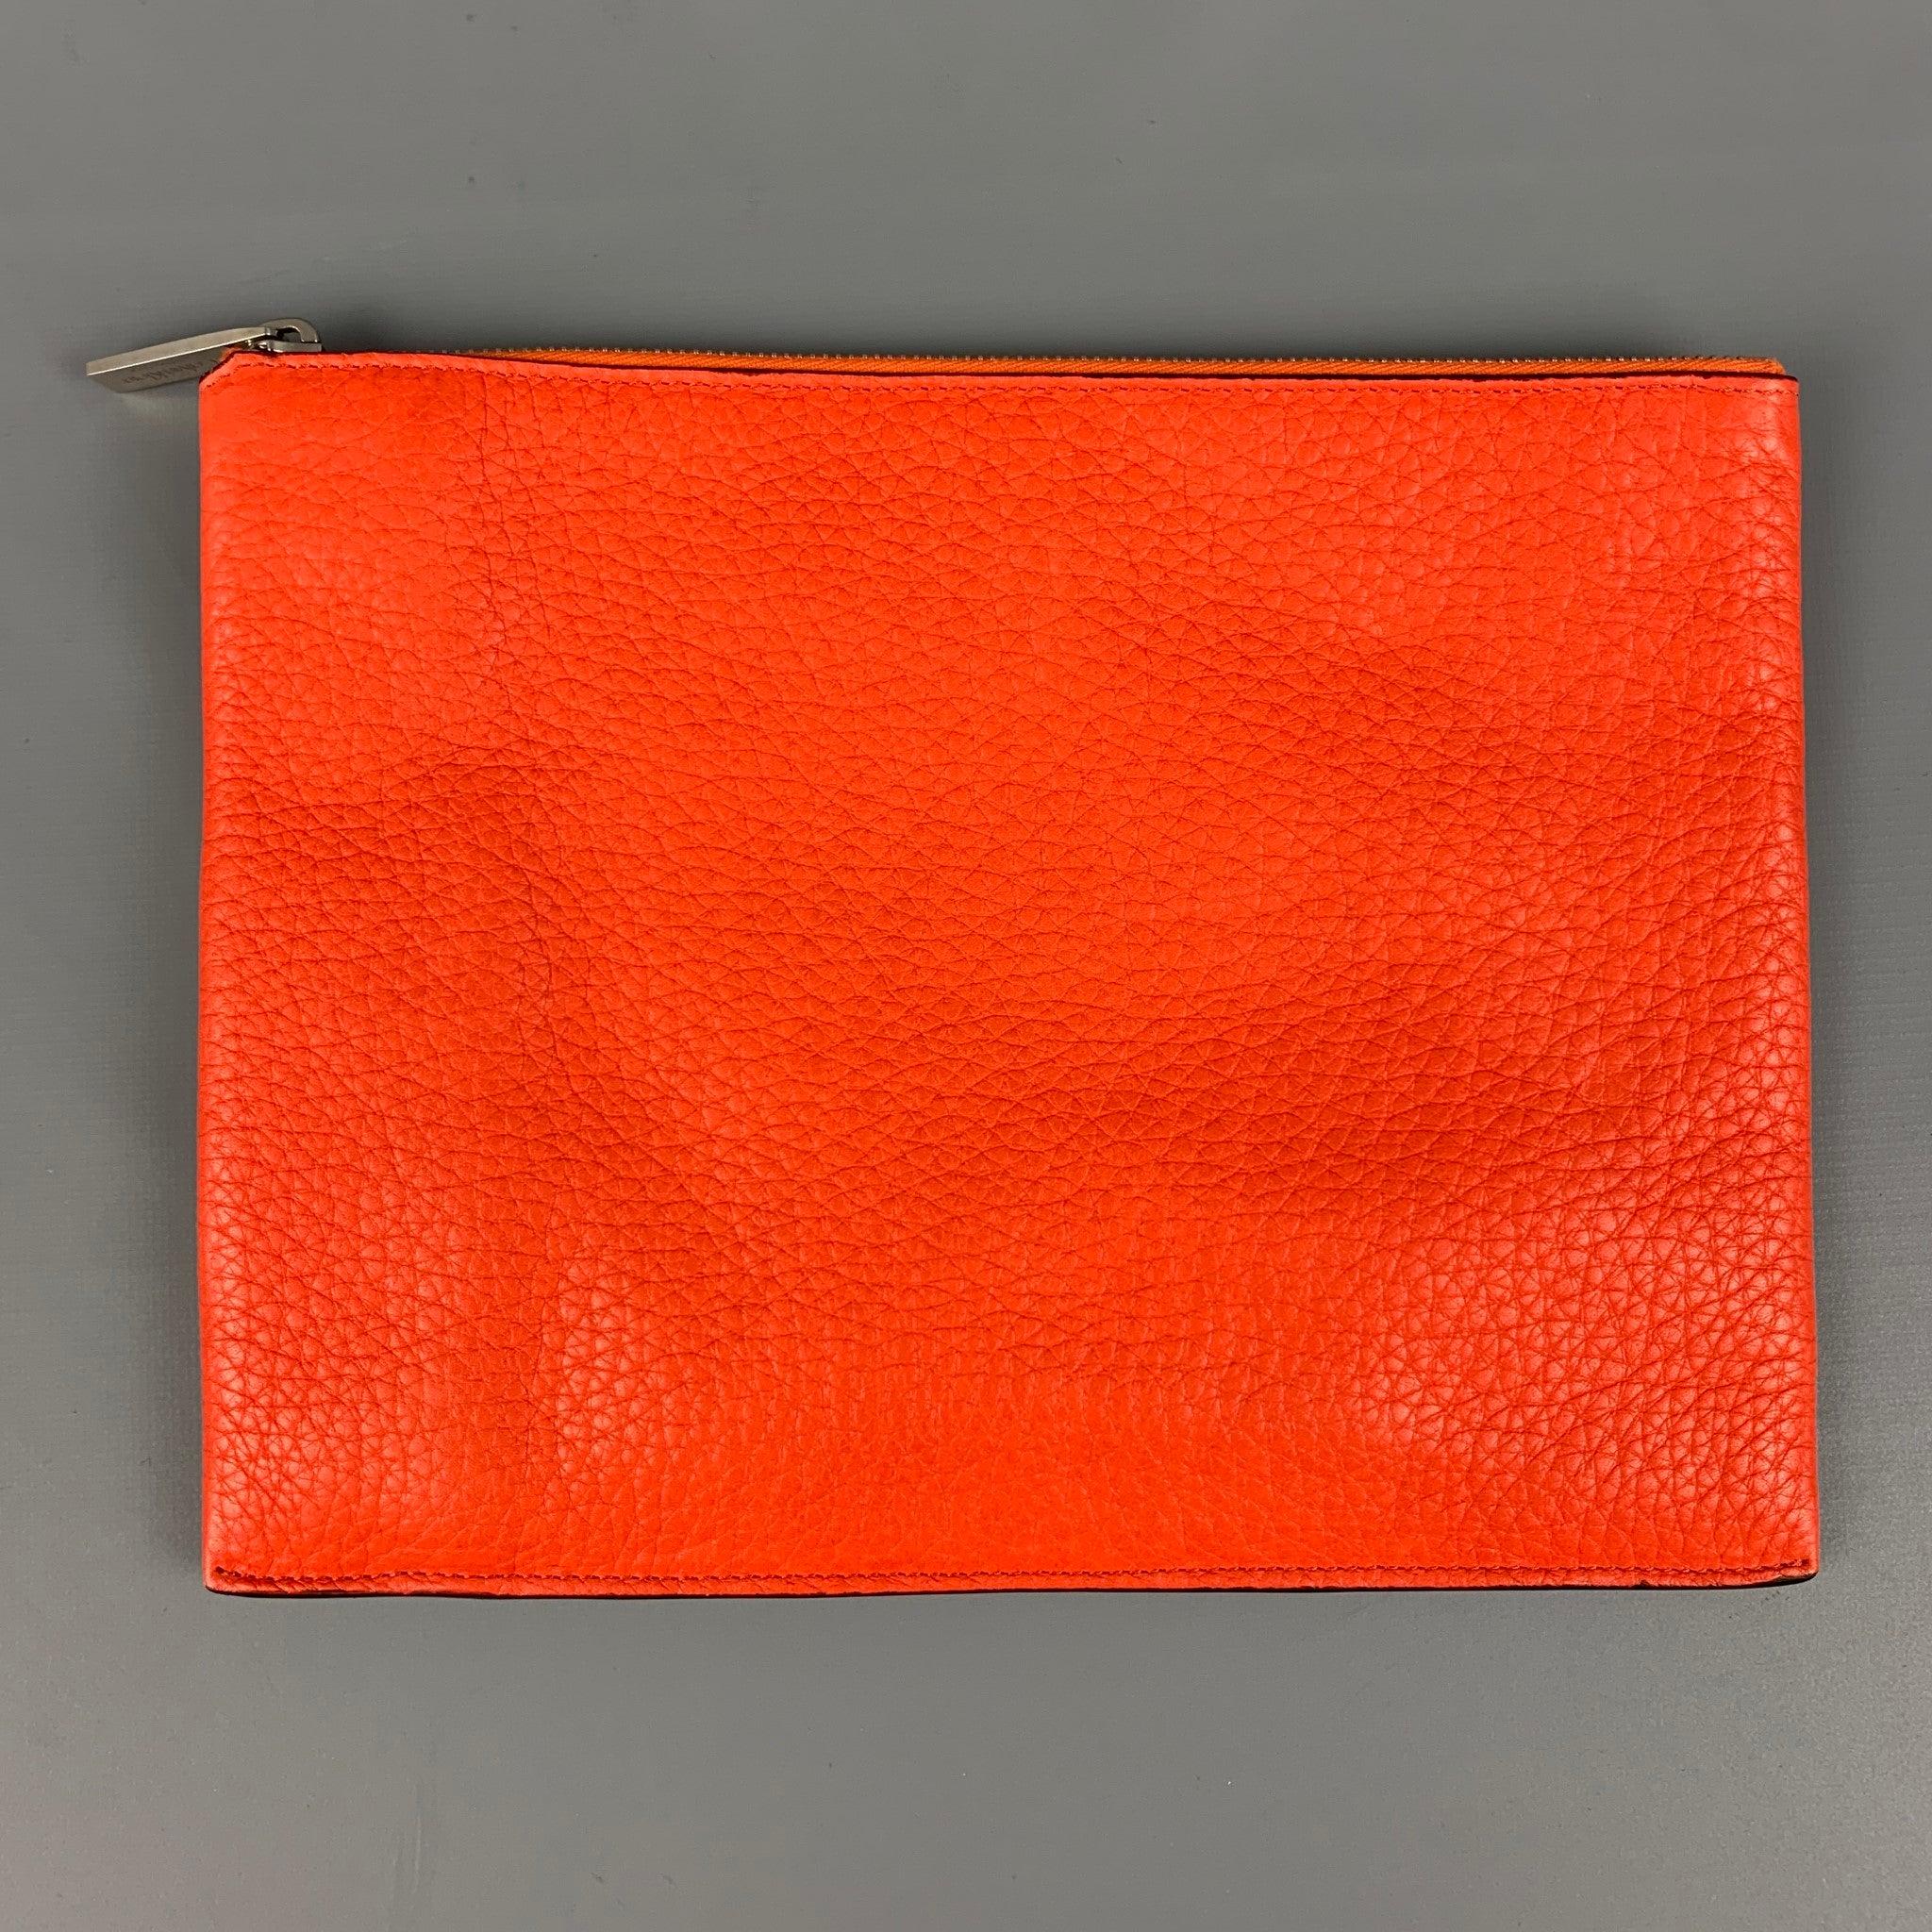 CALVIN KLEIN COLLECTION pouch bag comes in a orange textured leather featuring a top zipper closure. Made in Italy.
 Very Good
 Pre-Owned Condition. 
 

 Measurements: 
  Length: 10.5 inches Height:
 8 inches 
  
  
  
 Sui Generis Reference: